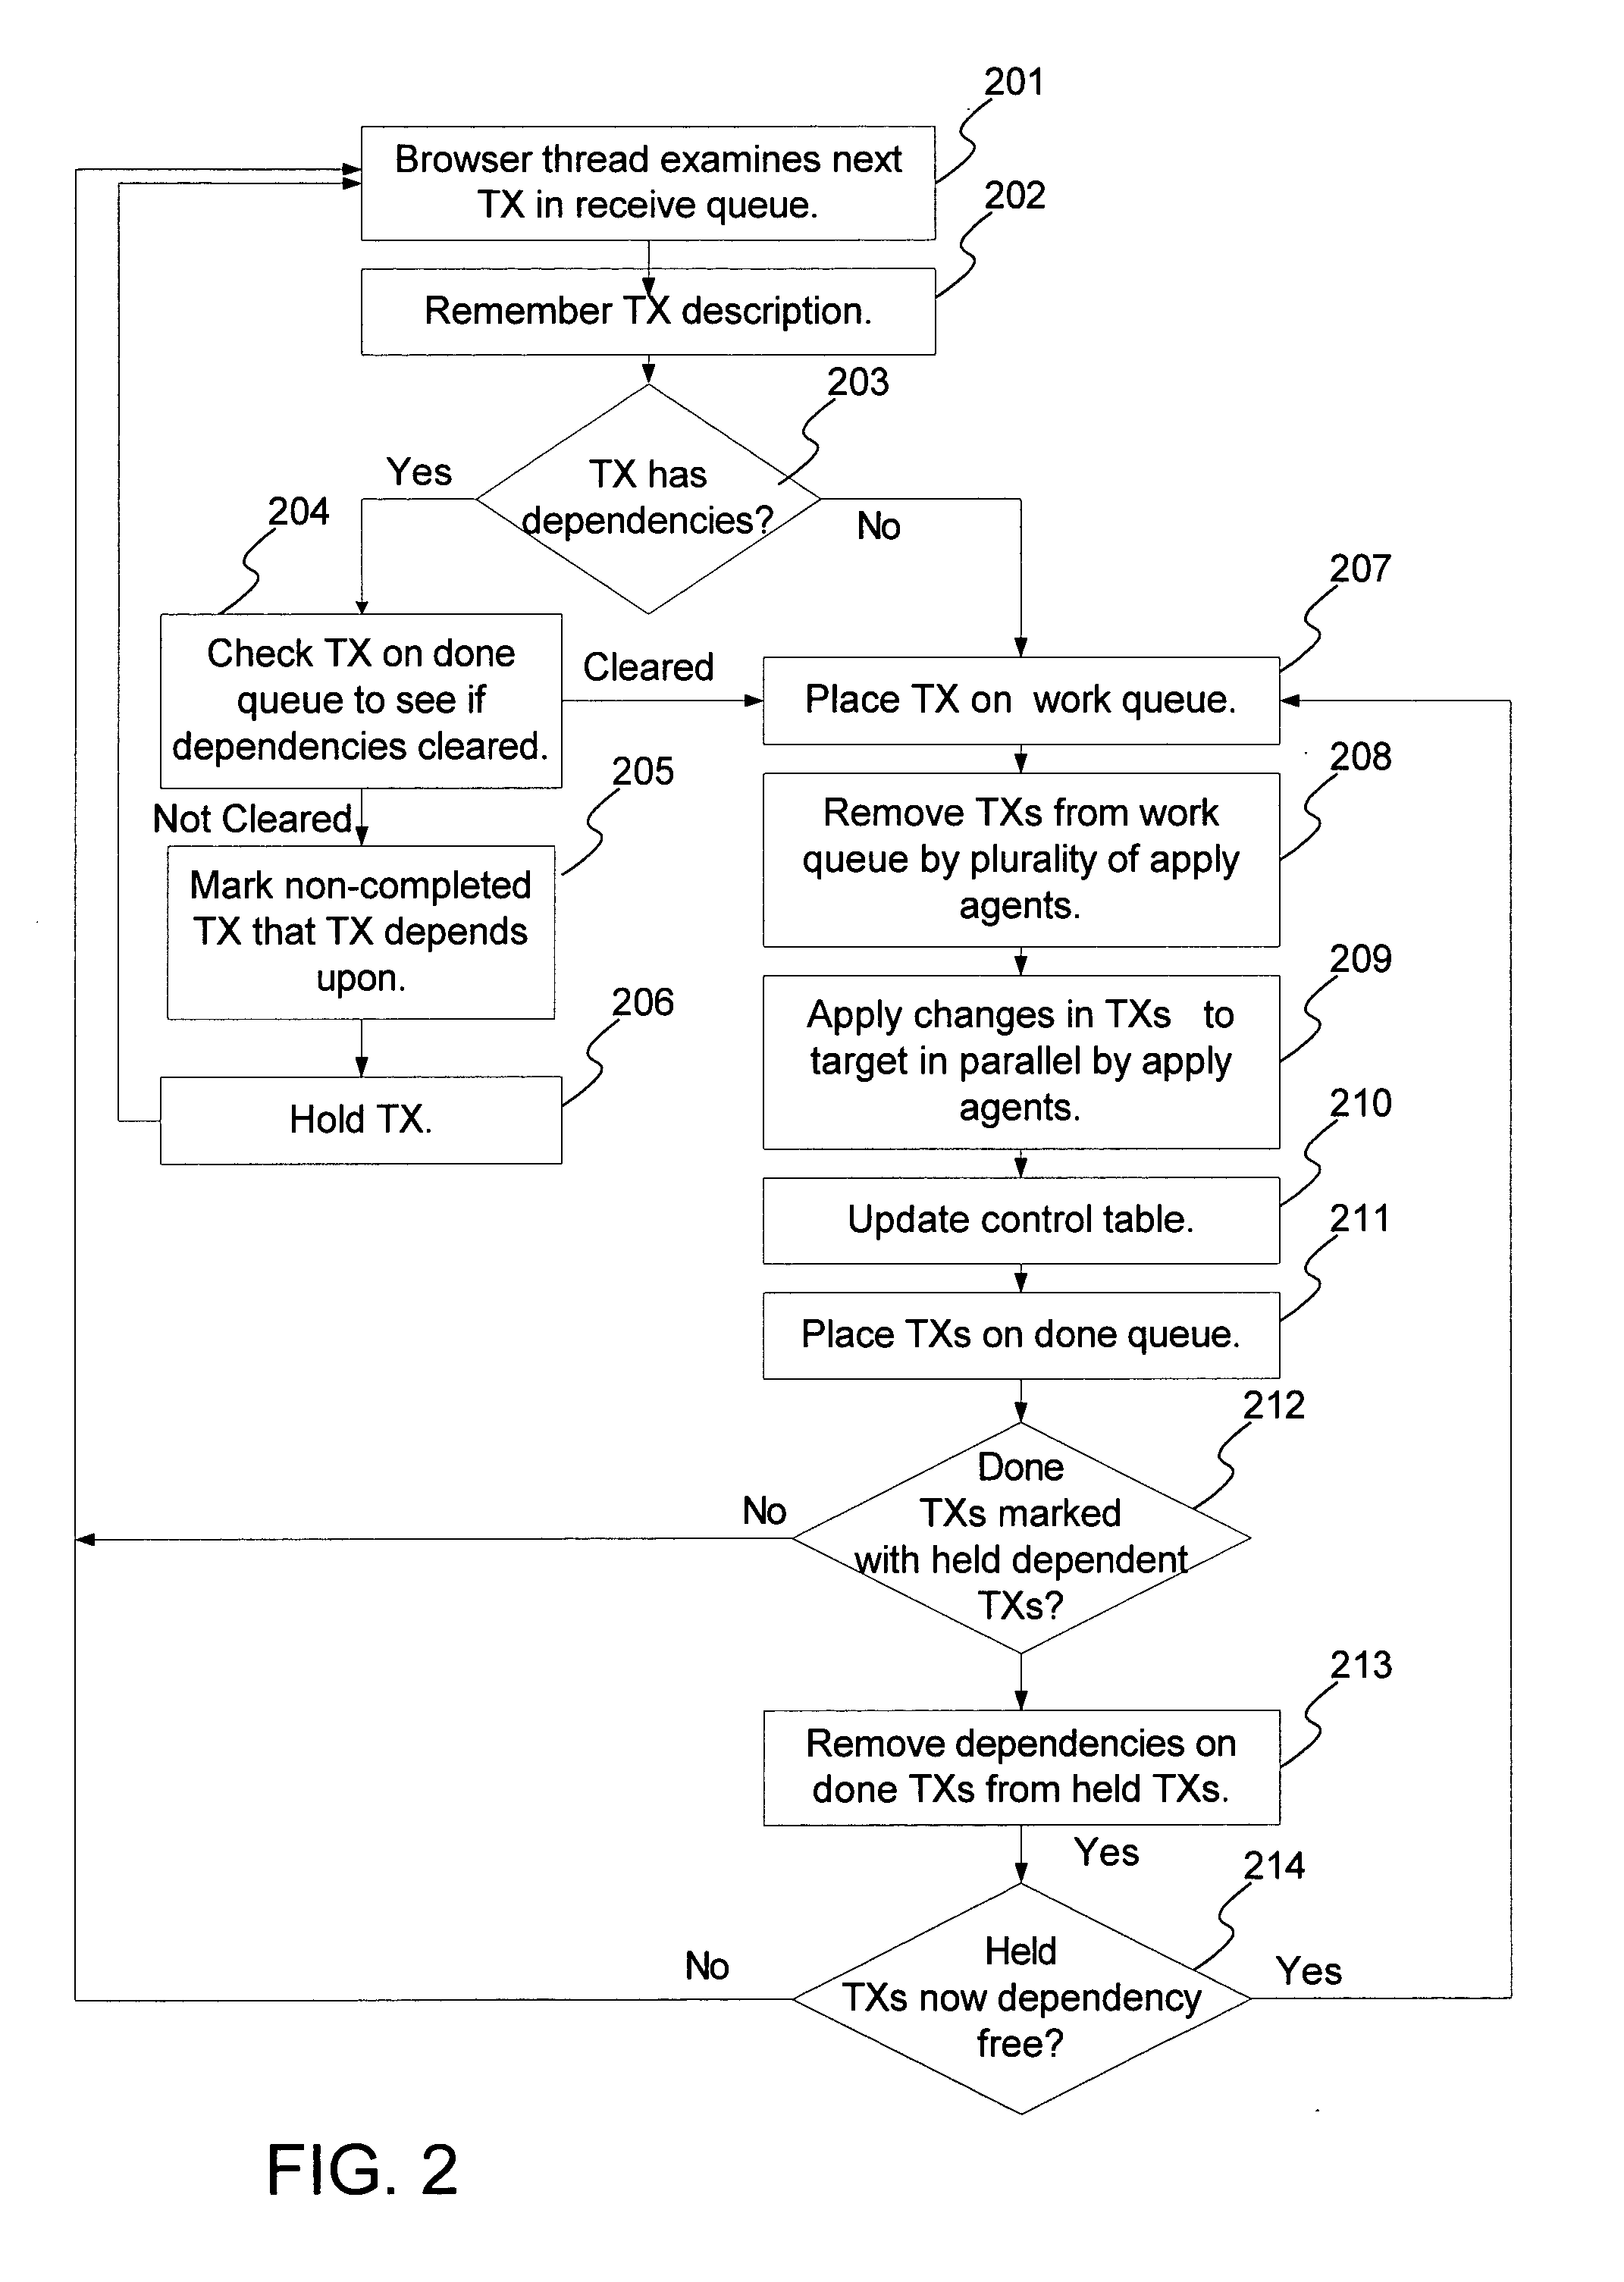 Parallel apply processing in data replication with preservation of transaction integrity and source ordering of dependent updates